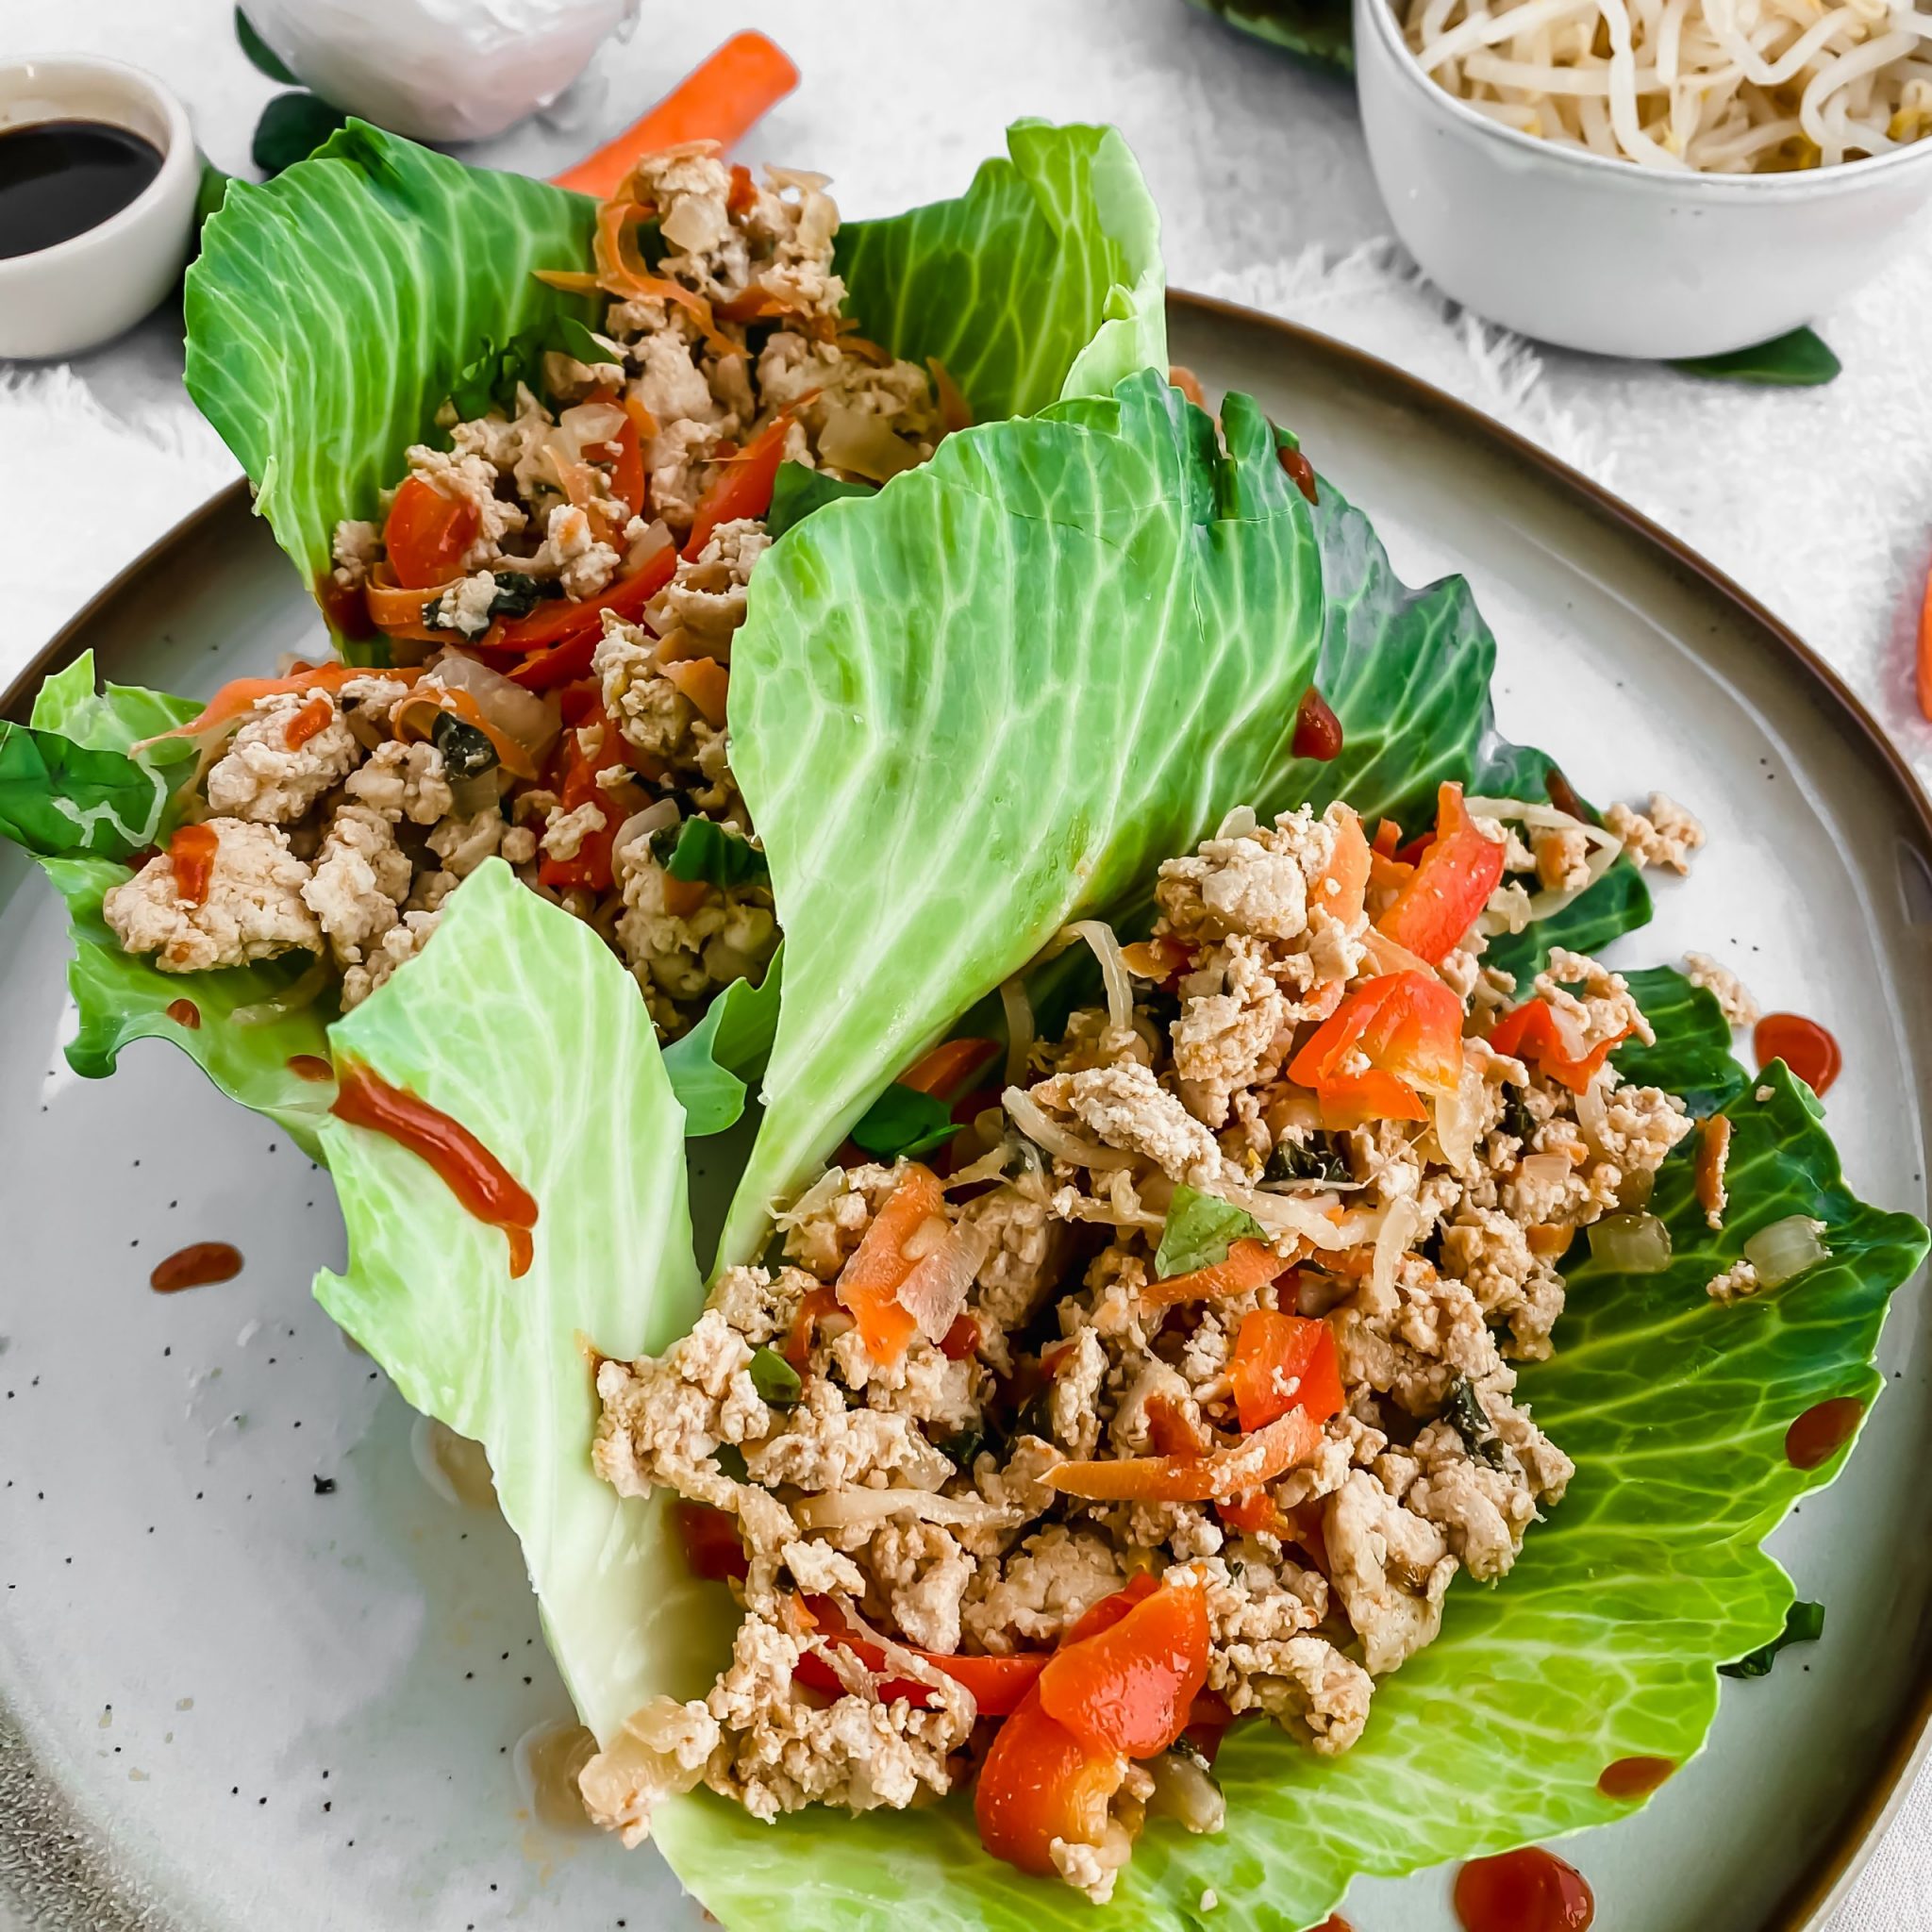 Close up of two Thai chicken lettuce wraps sitting on a ceramic plate with sriracha drizzled overtop. The wraps are filled with a chicken and vegetable mixture cooked in a soy sauce simmer. There are more veggies in the background.